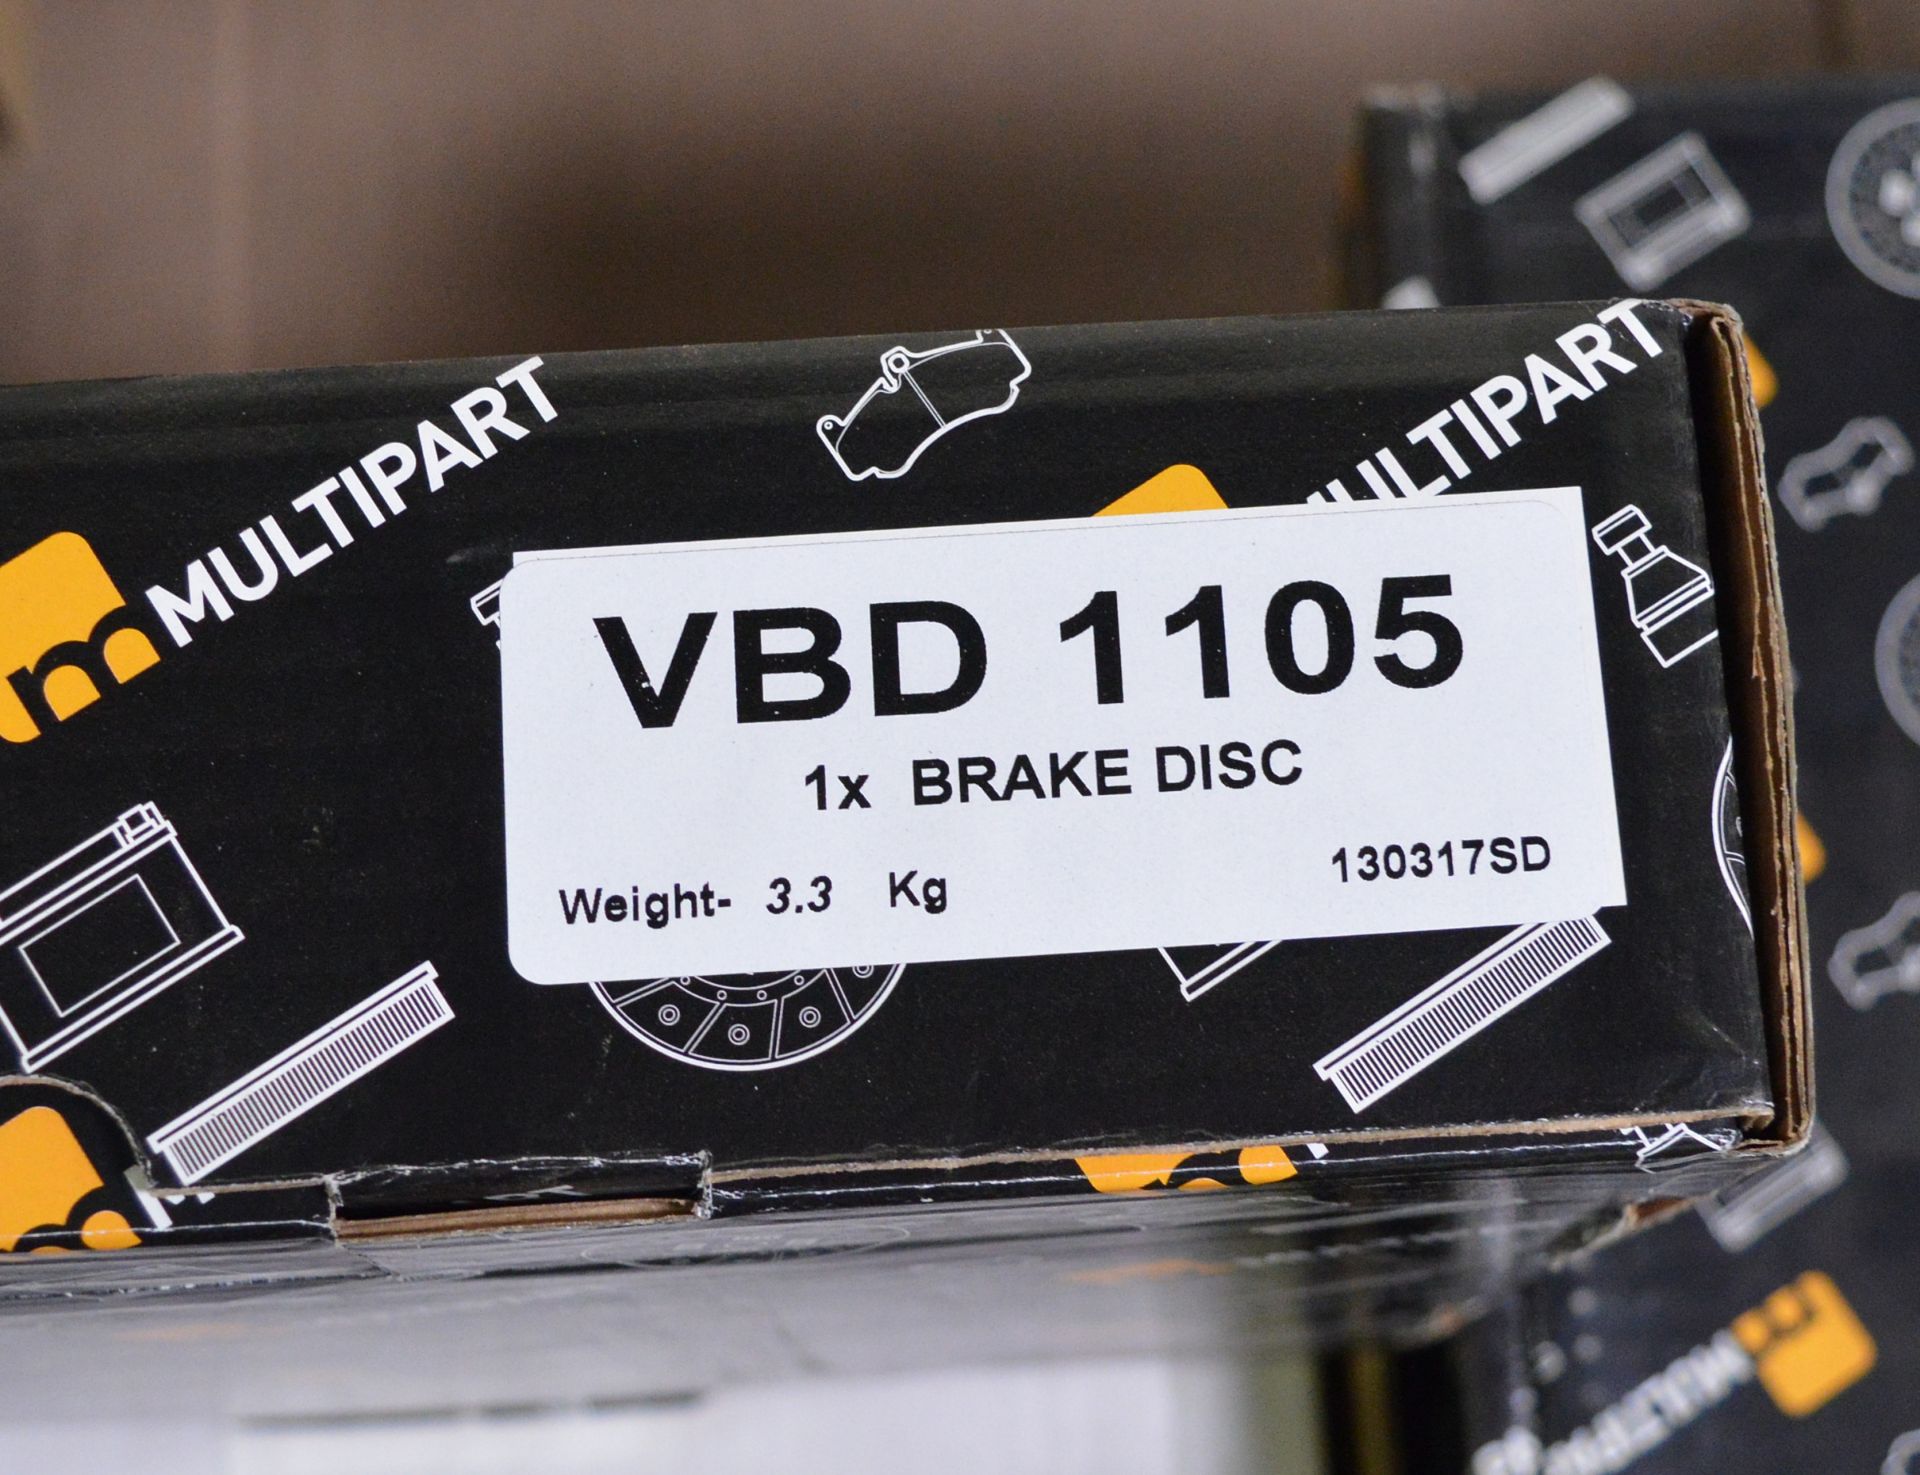 Vehicle parts - brakes discs, brake show sets - see picture for itinerary for model number - Image 6 of 7